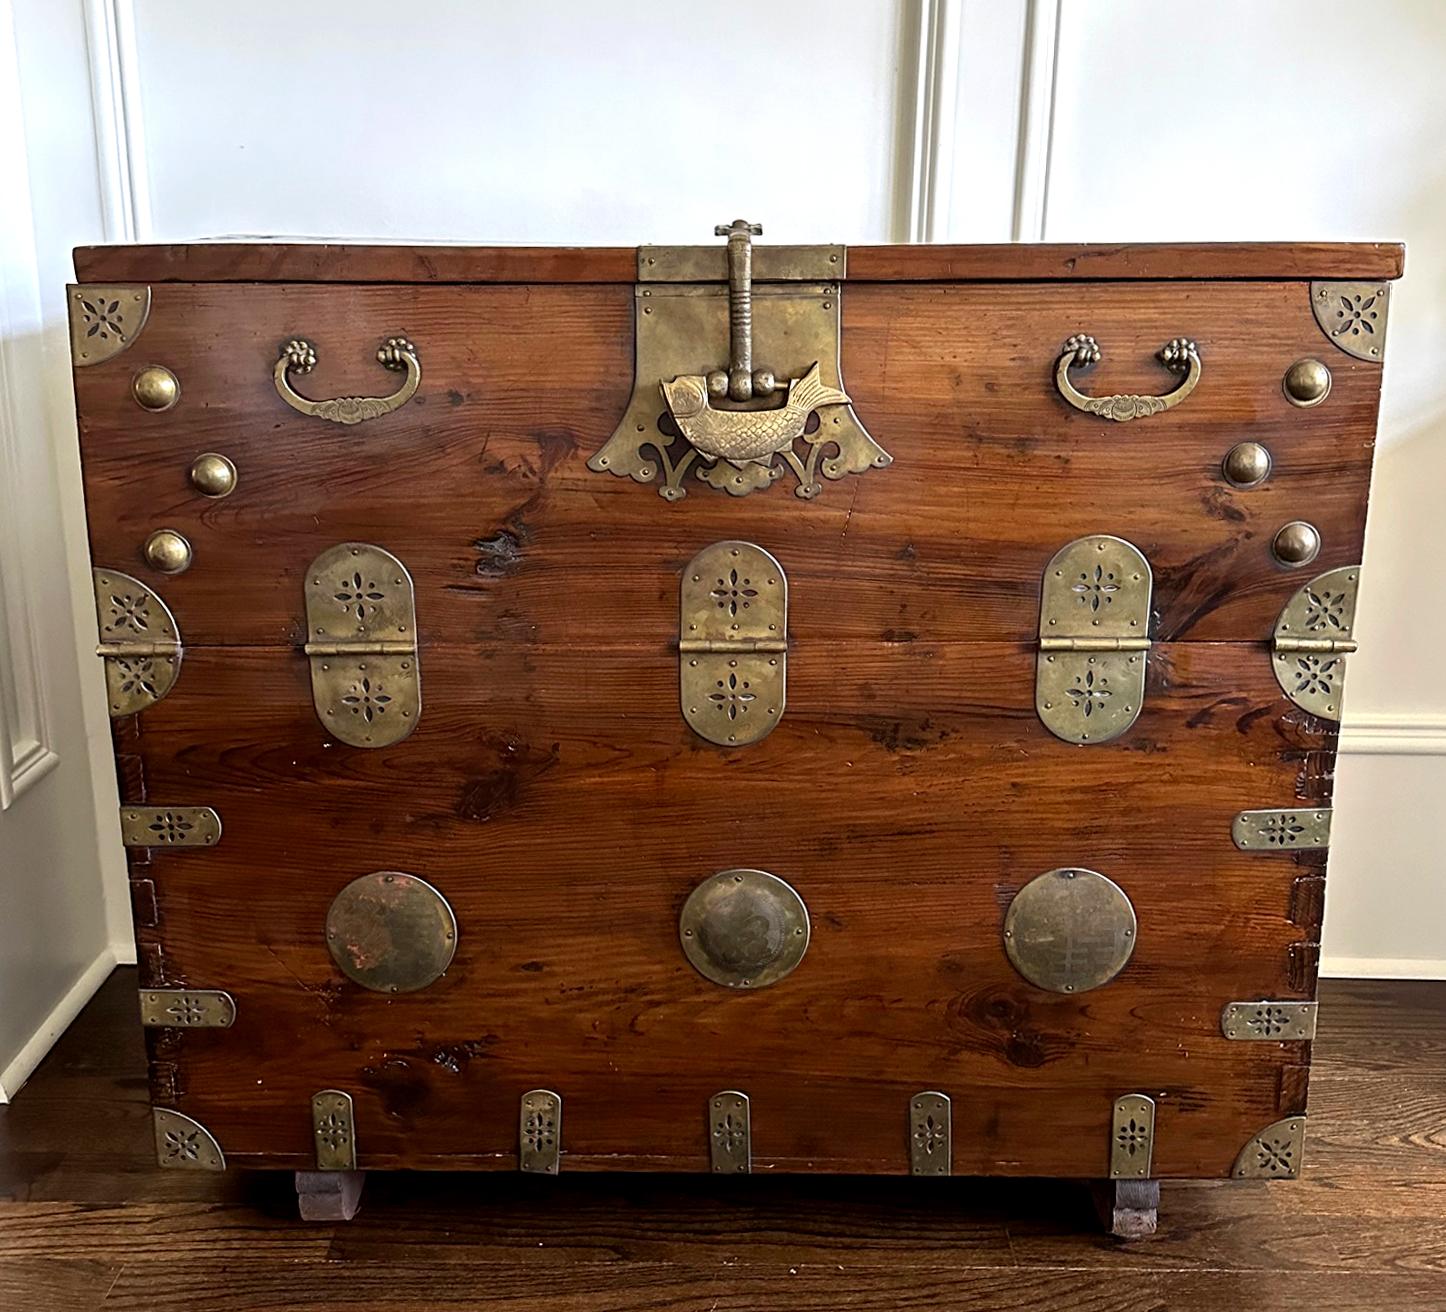 A Korean Bandaji chest circa late 19th century of Joseon Dynasty, from Gyeonggi Do (Central to South of Korean Peninsula where Seoul is located), likely Namhansanseong subtype. Known as drop front half opening chest, Bandaji was traditionally used